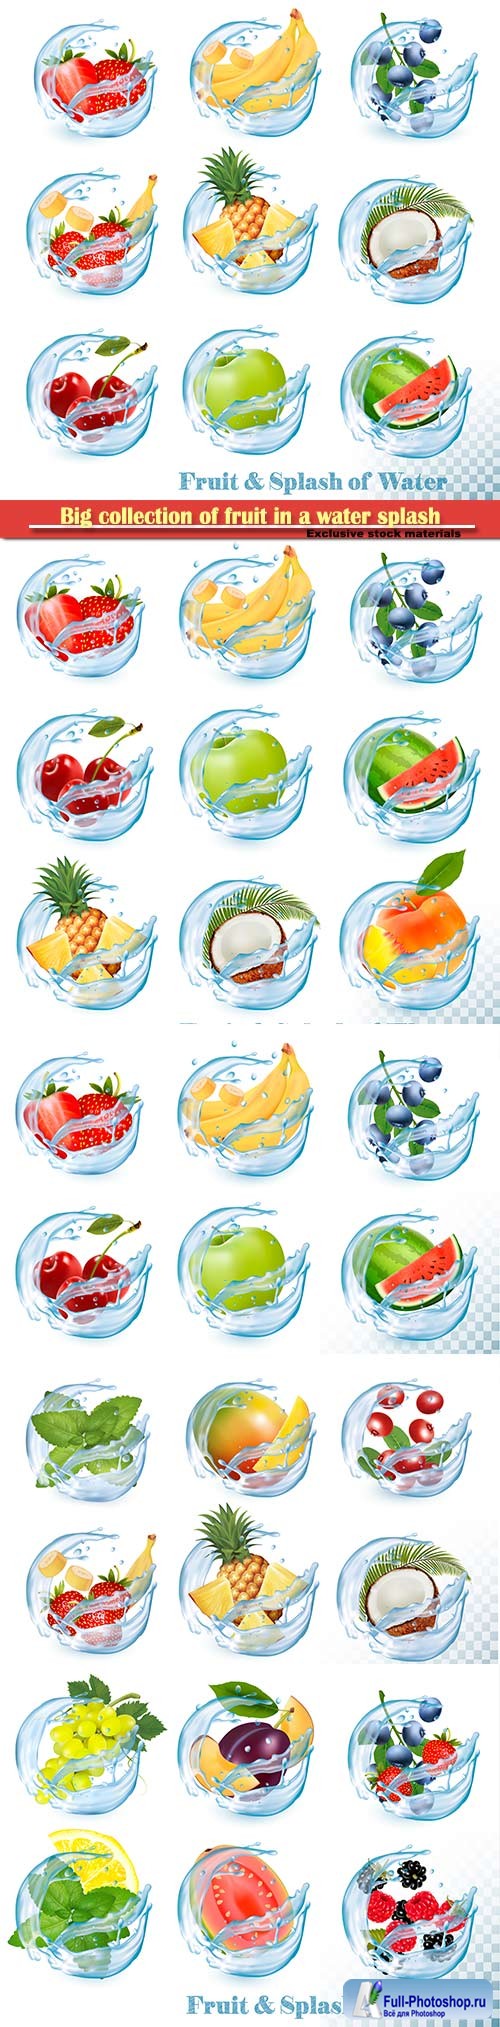 Big collection of fruit in a water splash icons vector set